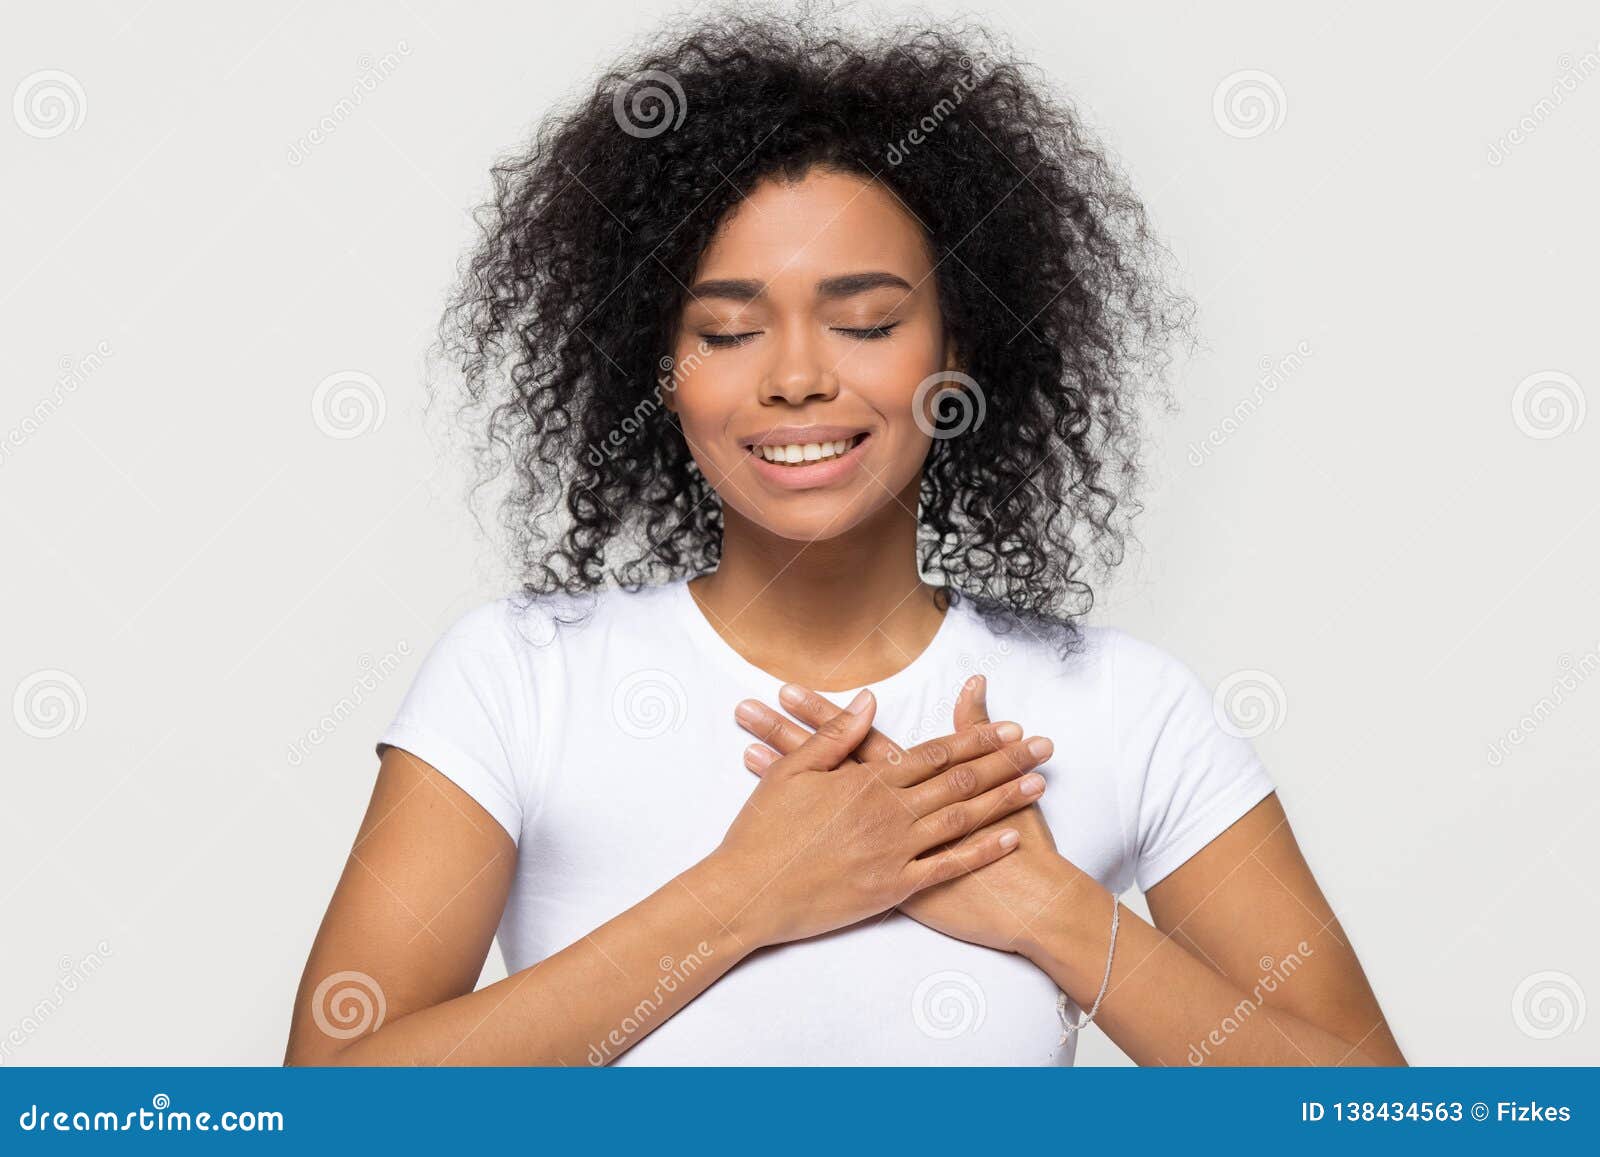 grateful happy black woman holding hands on chest feeling thankful